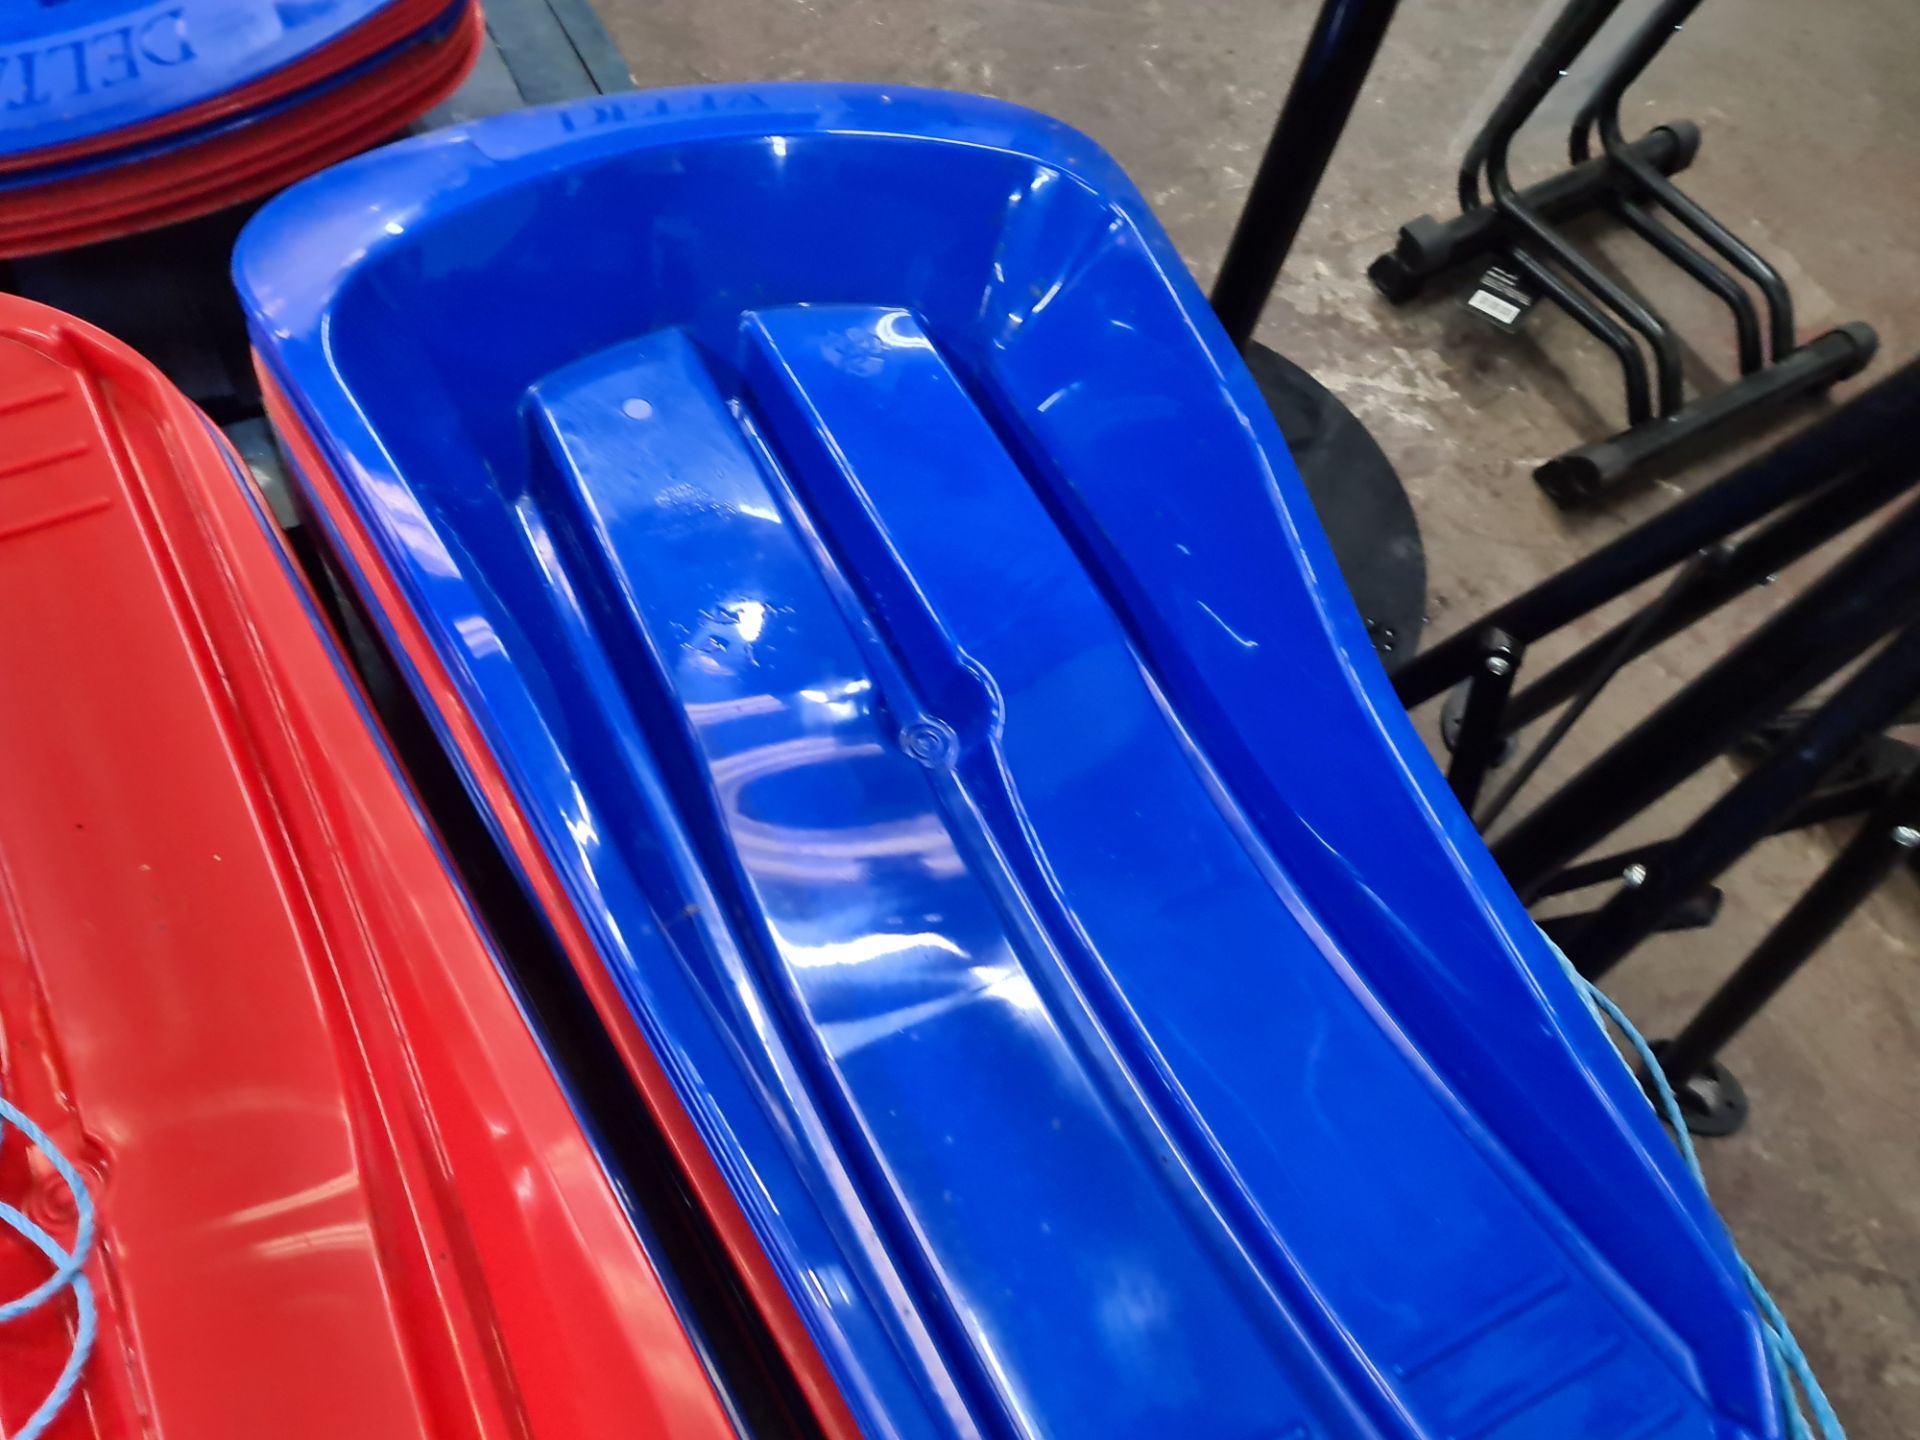 13 off Delta sledges - mixed lot of blue and red - Image 3 of 5